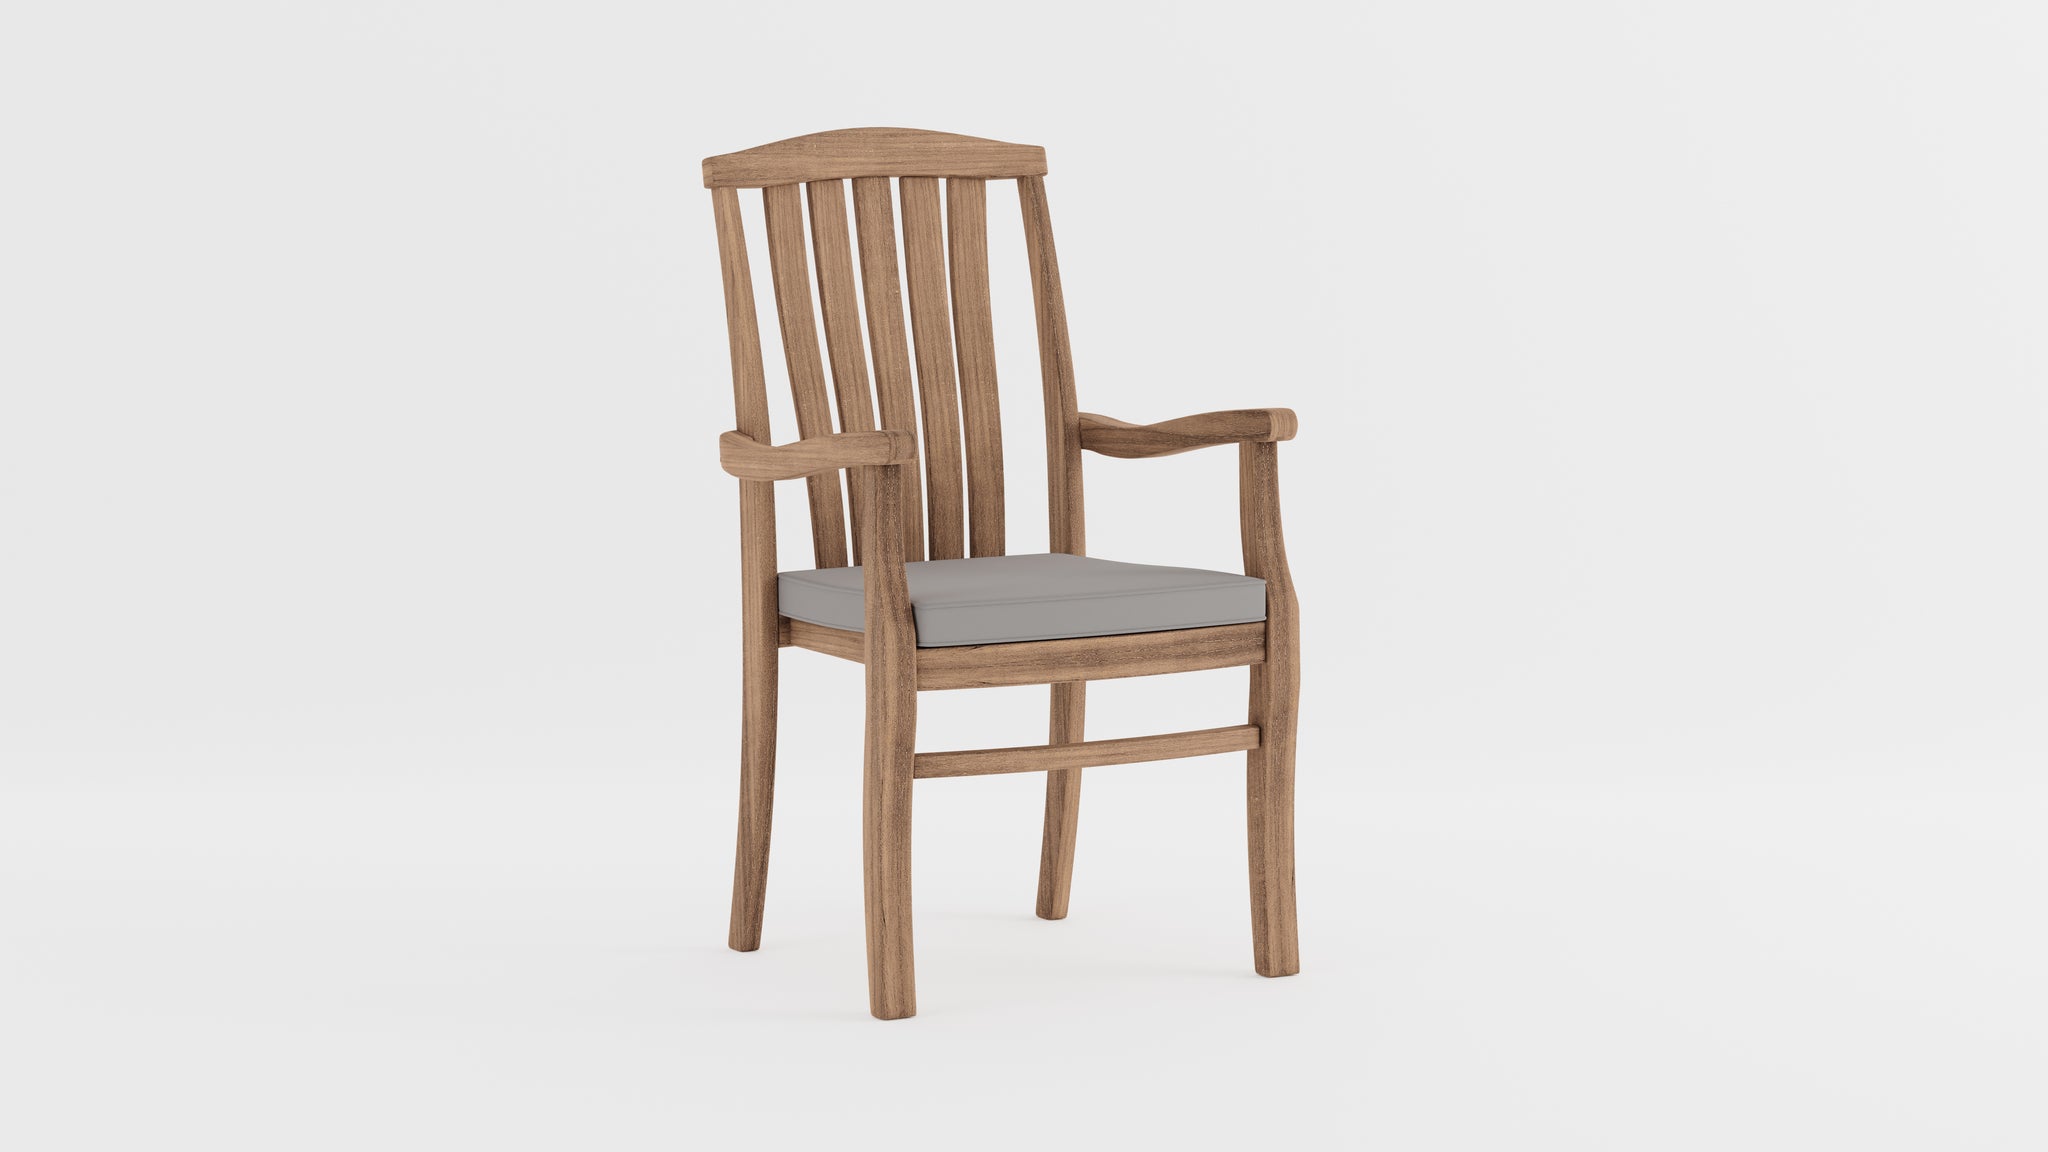 Dorchester Teak Stacking Carver Chair with Light Grey Cushion